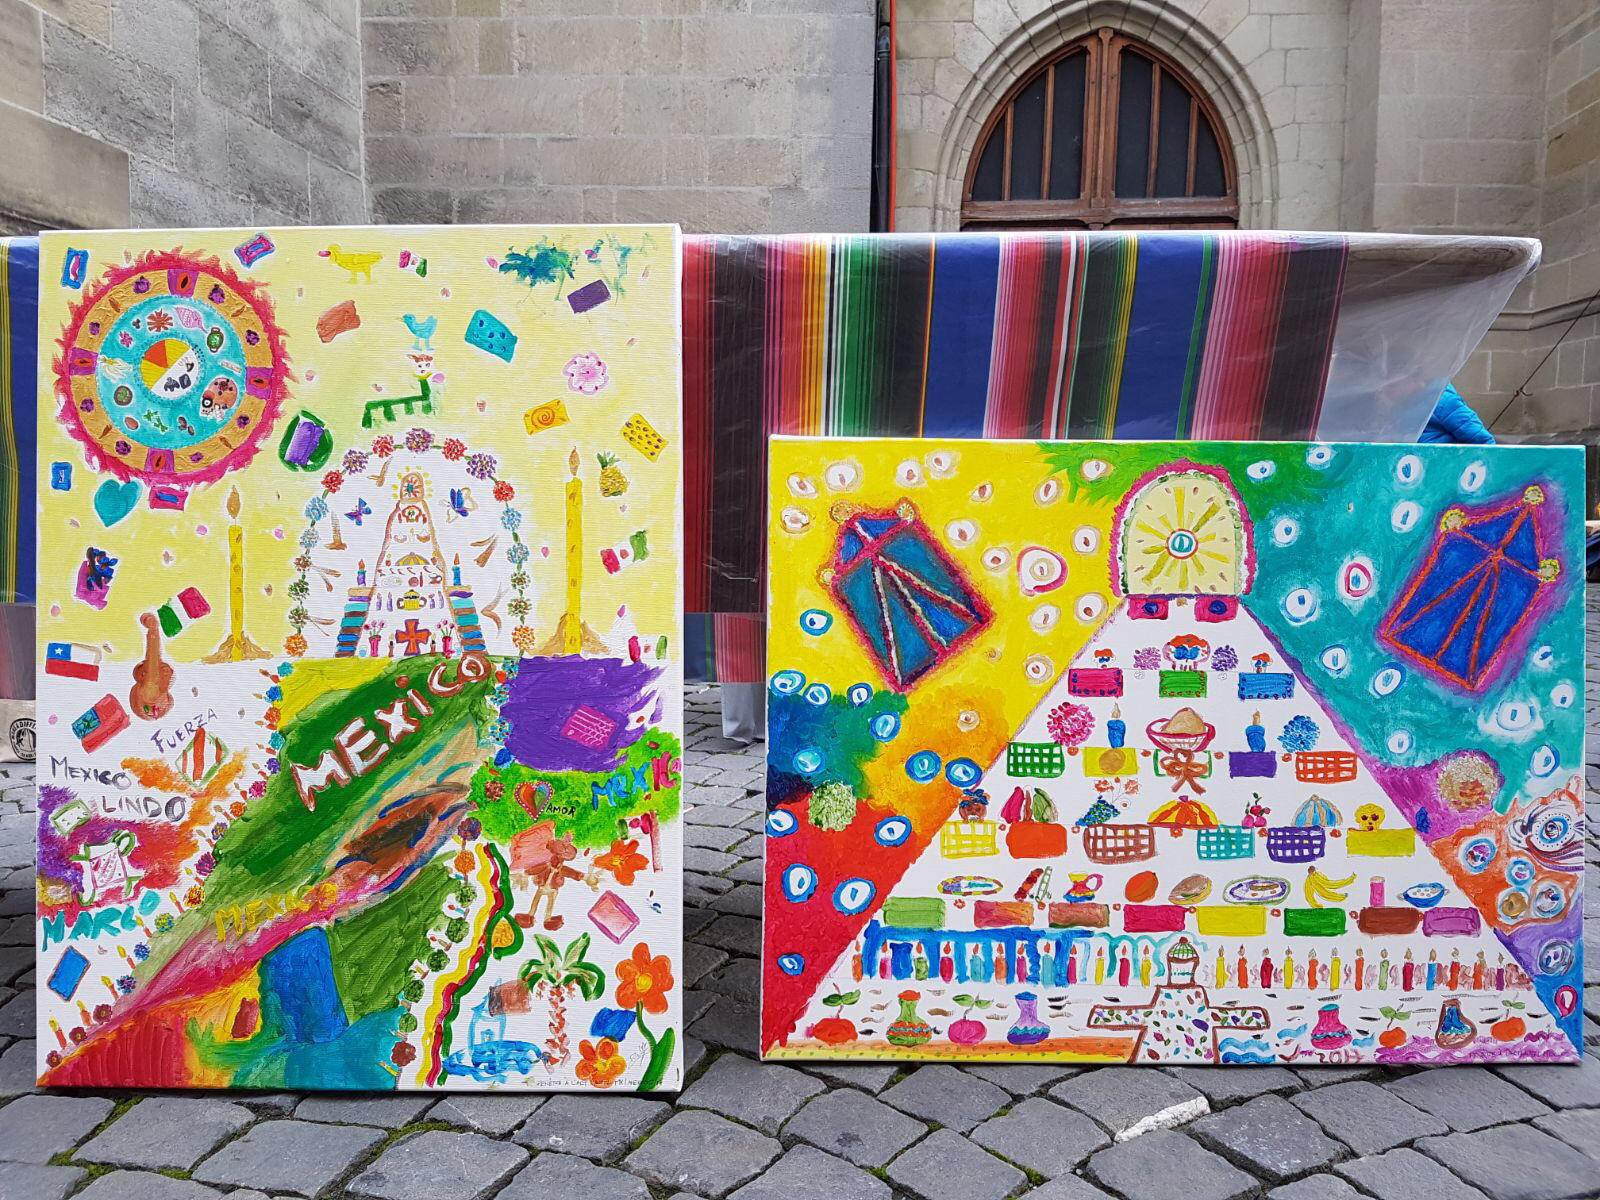 Creations by participants of a Lausanne painting workshop